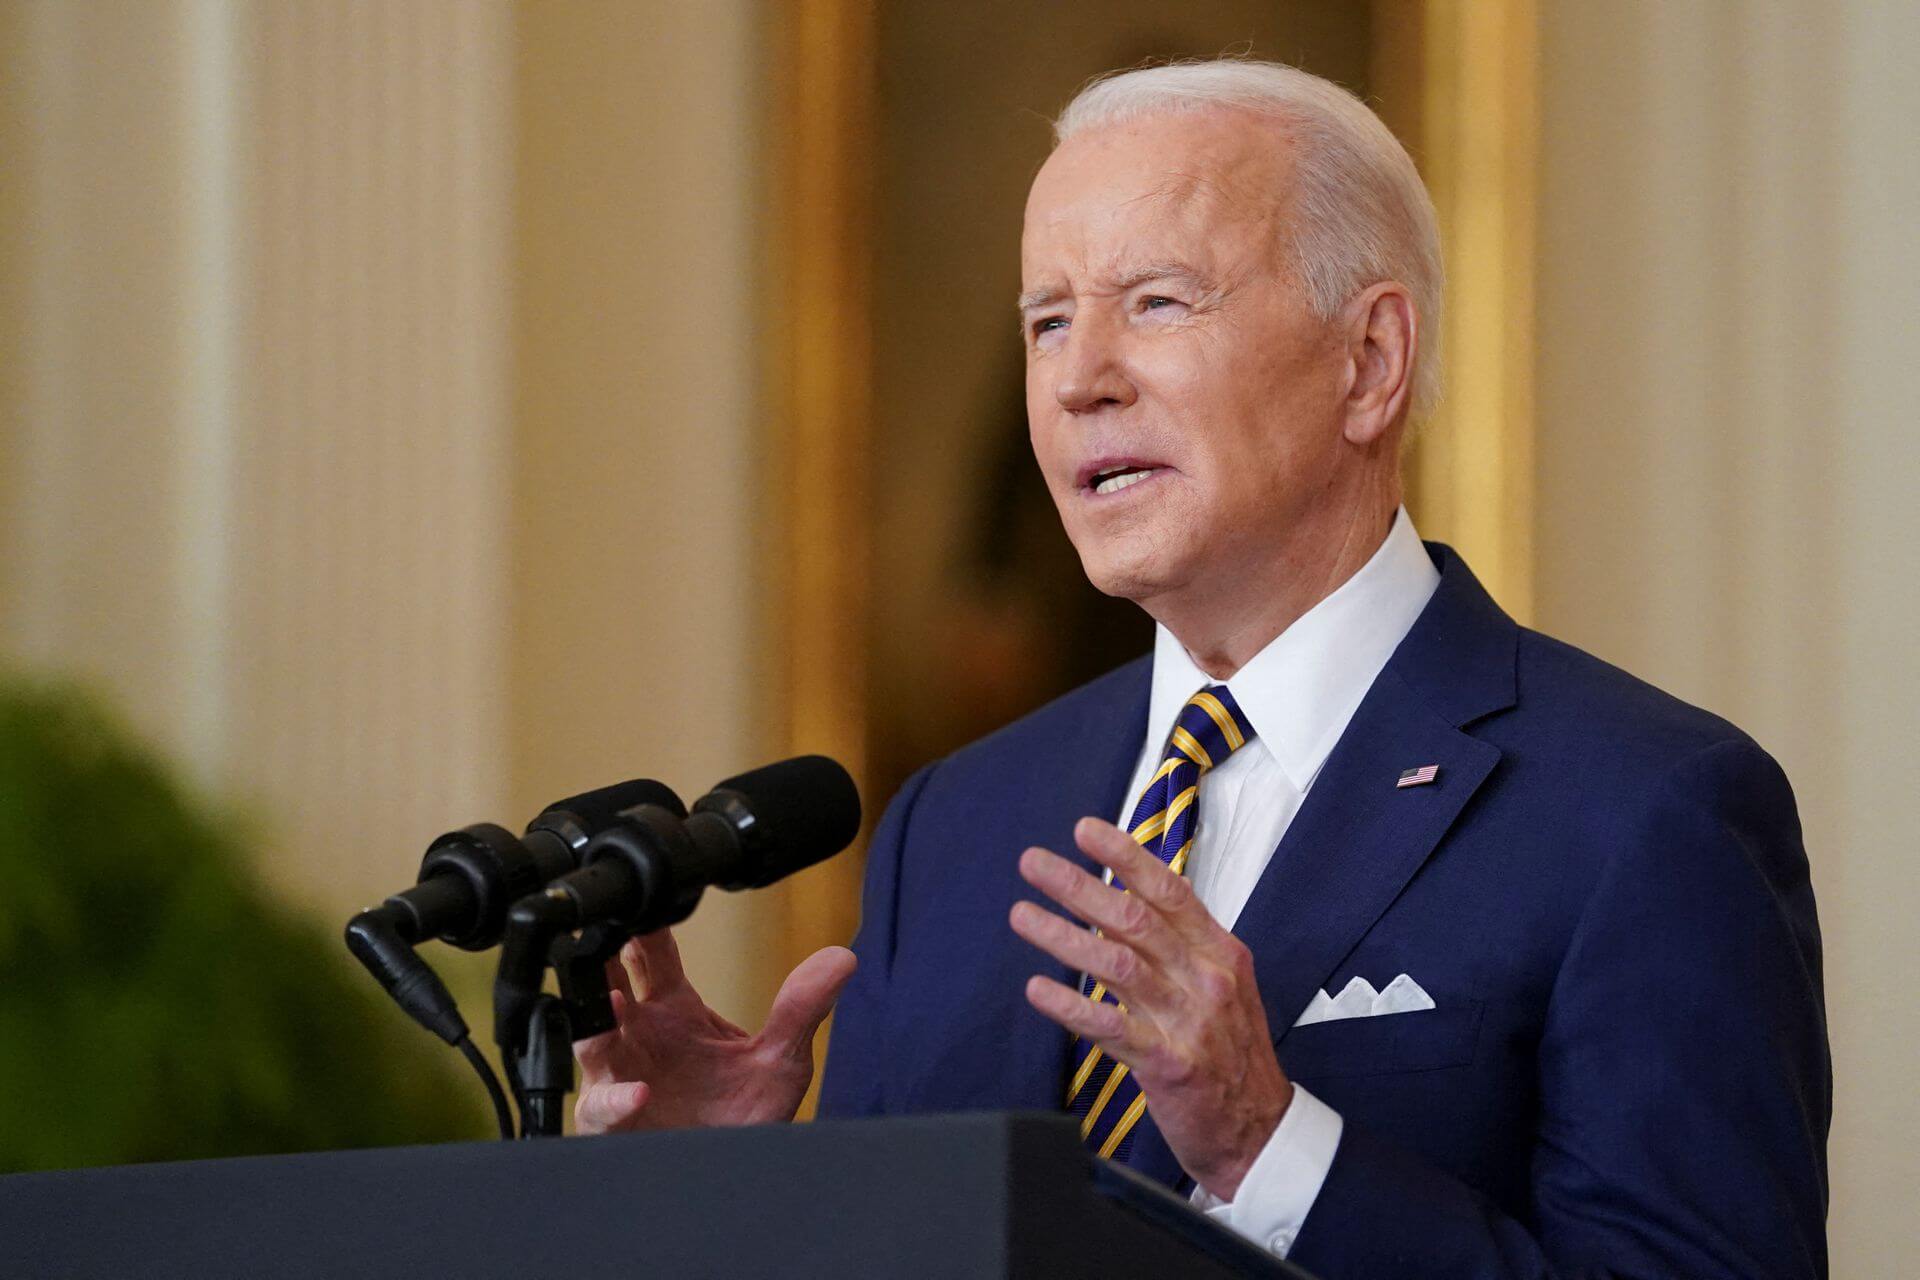 Biden Defends First-Year Record, Says He “Didn’t Overpromise”